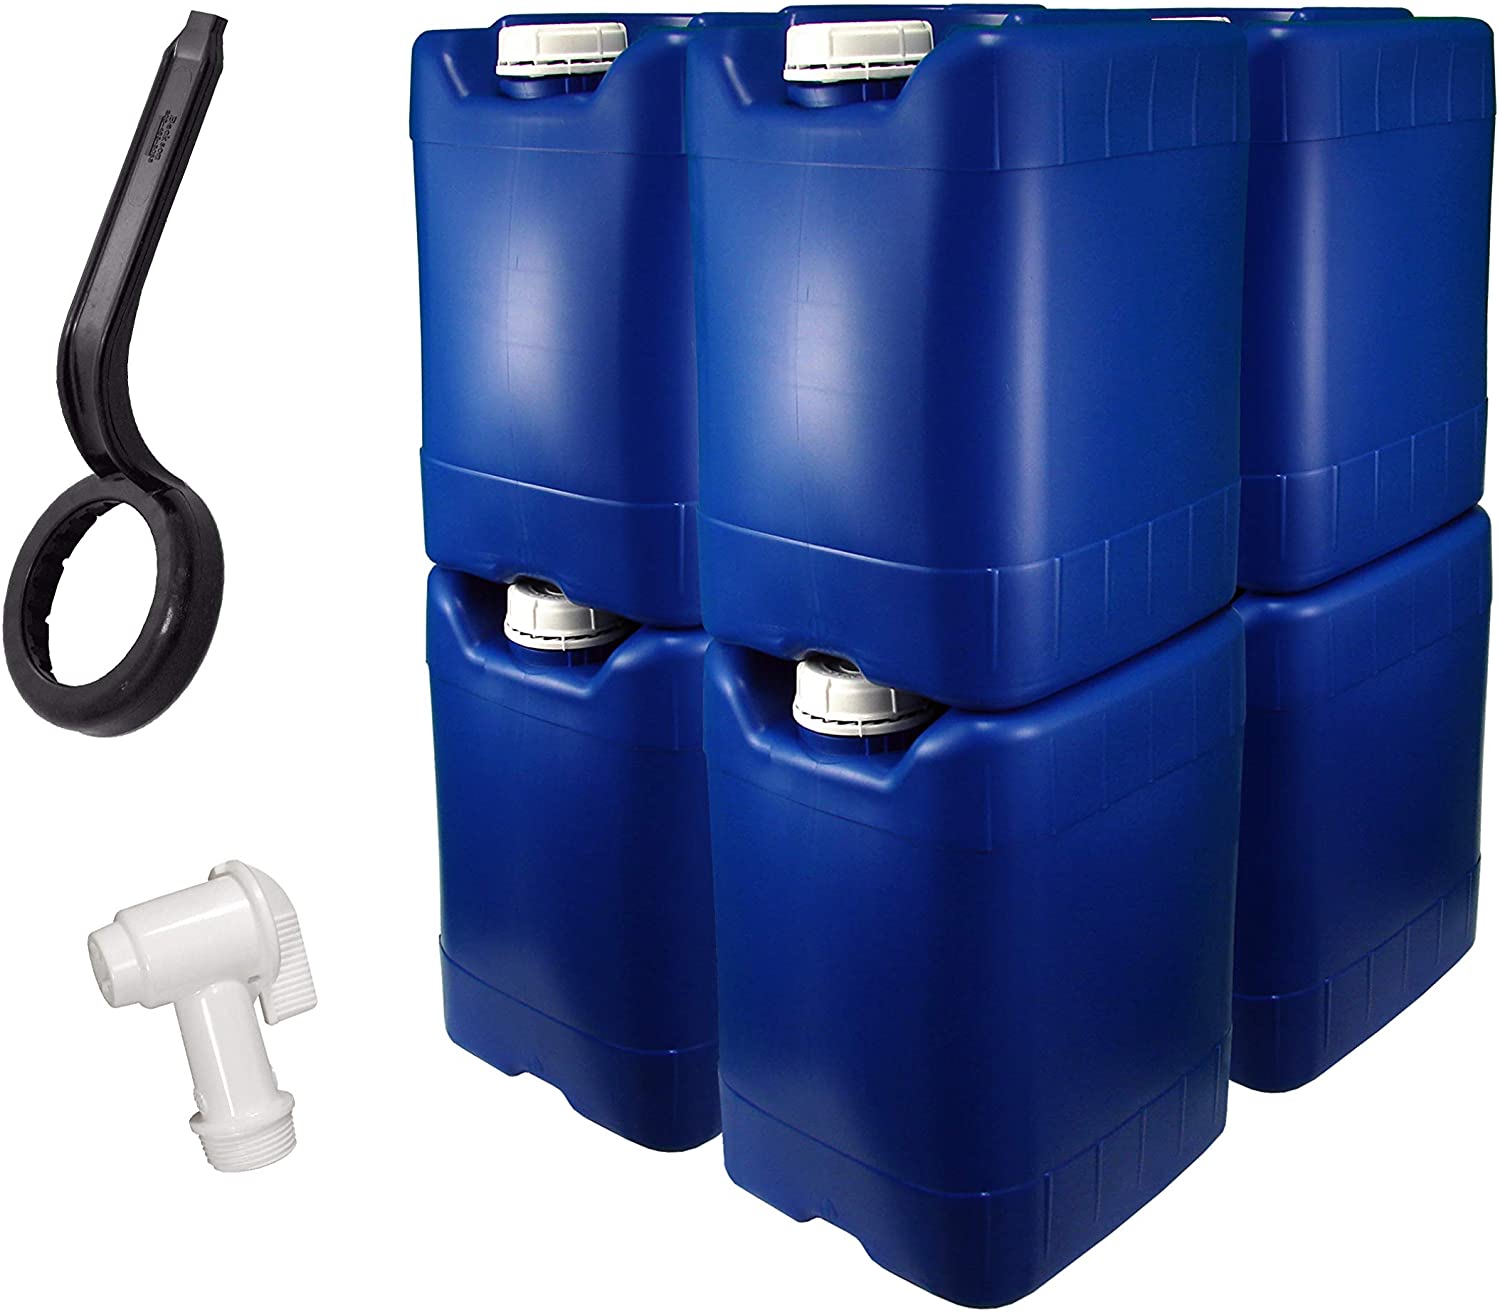 5-Gallon-Samson-Stackers-Blue-8-Pack-40-Gallons-Emergency-Water-Storage-Kit